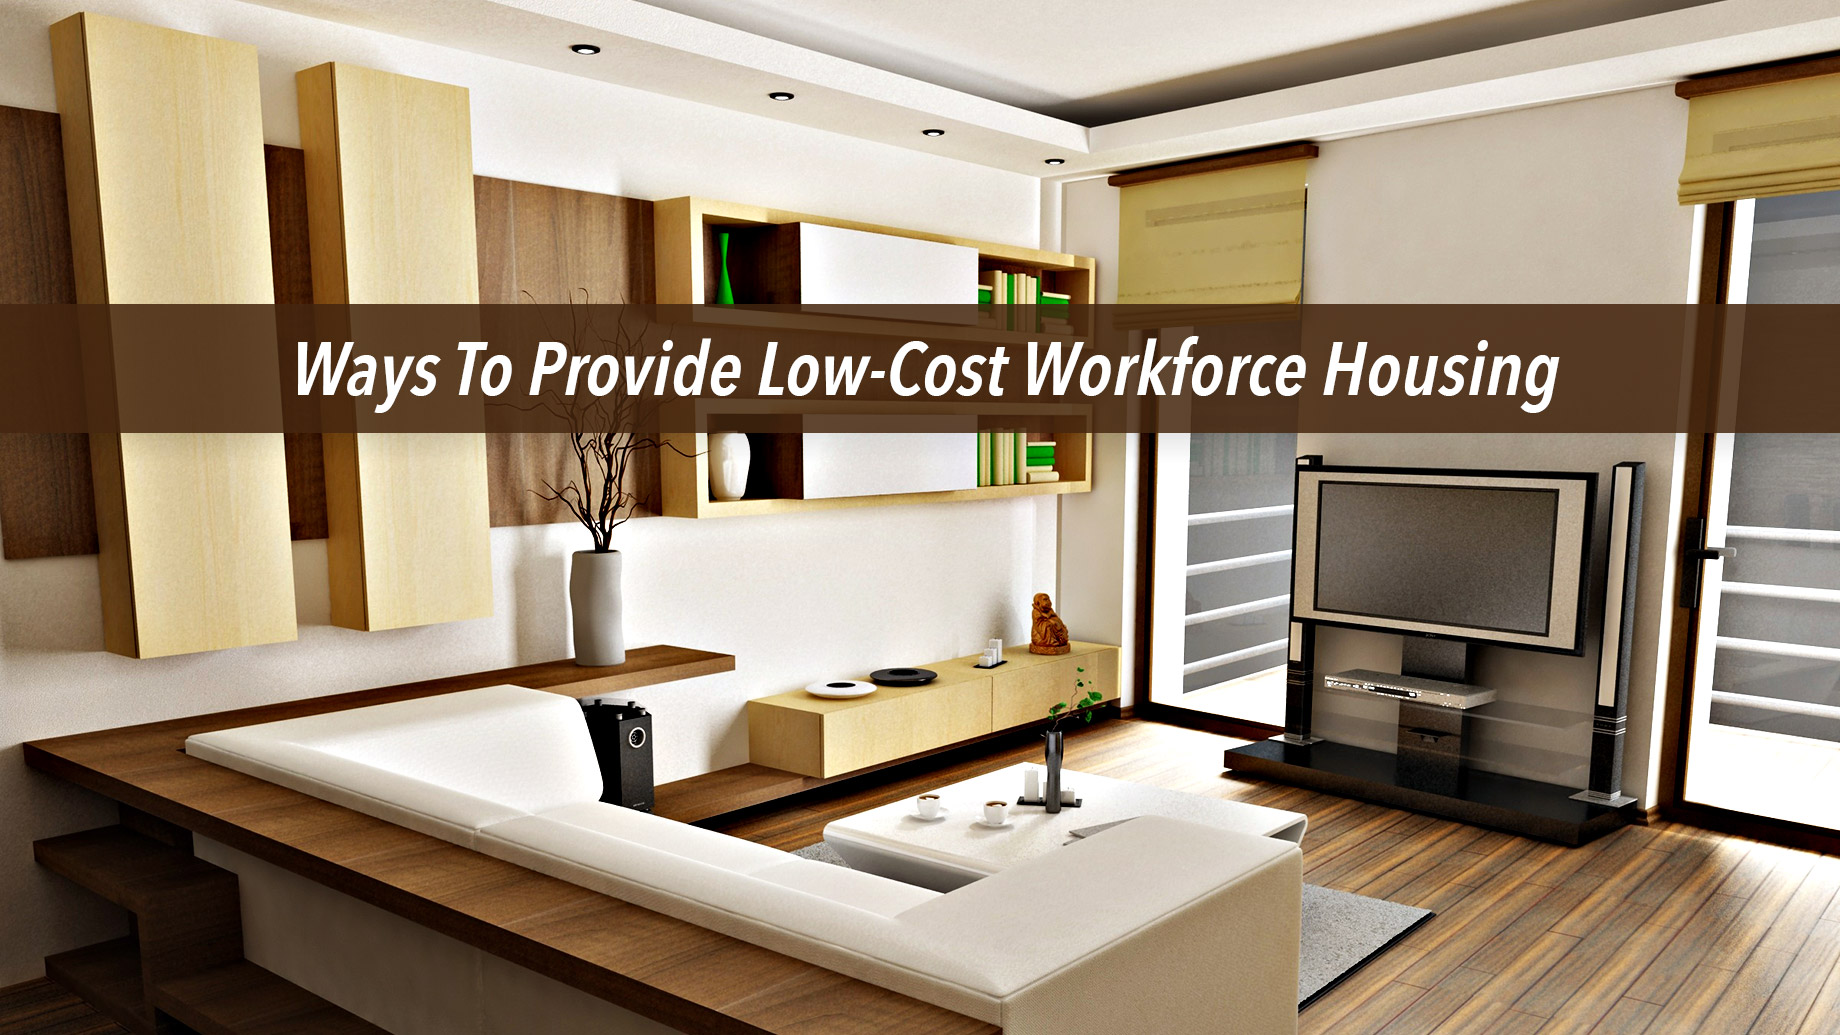 Ways To Provide Low-Cost Workforce Housing